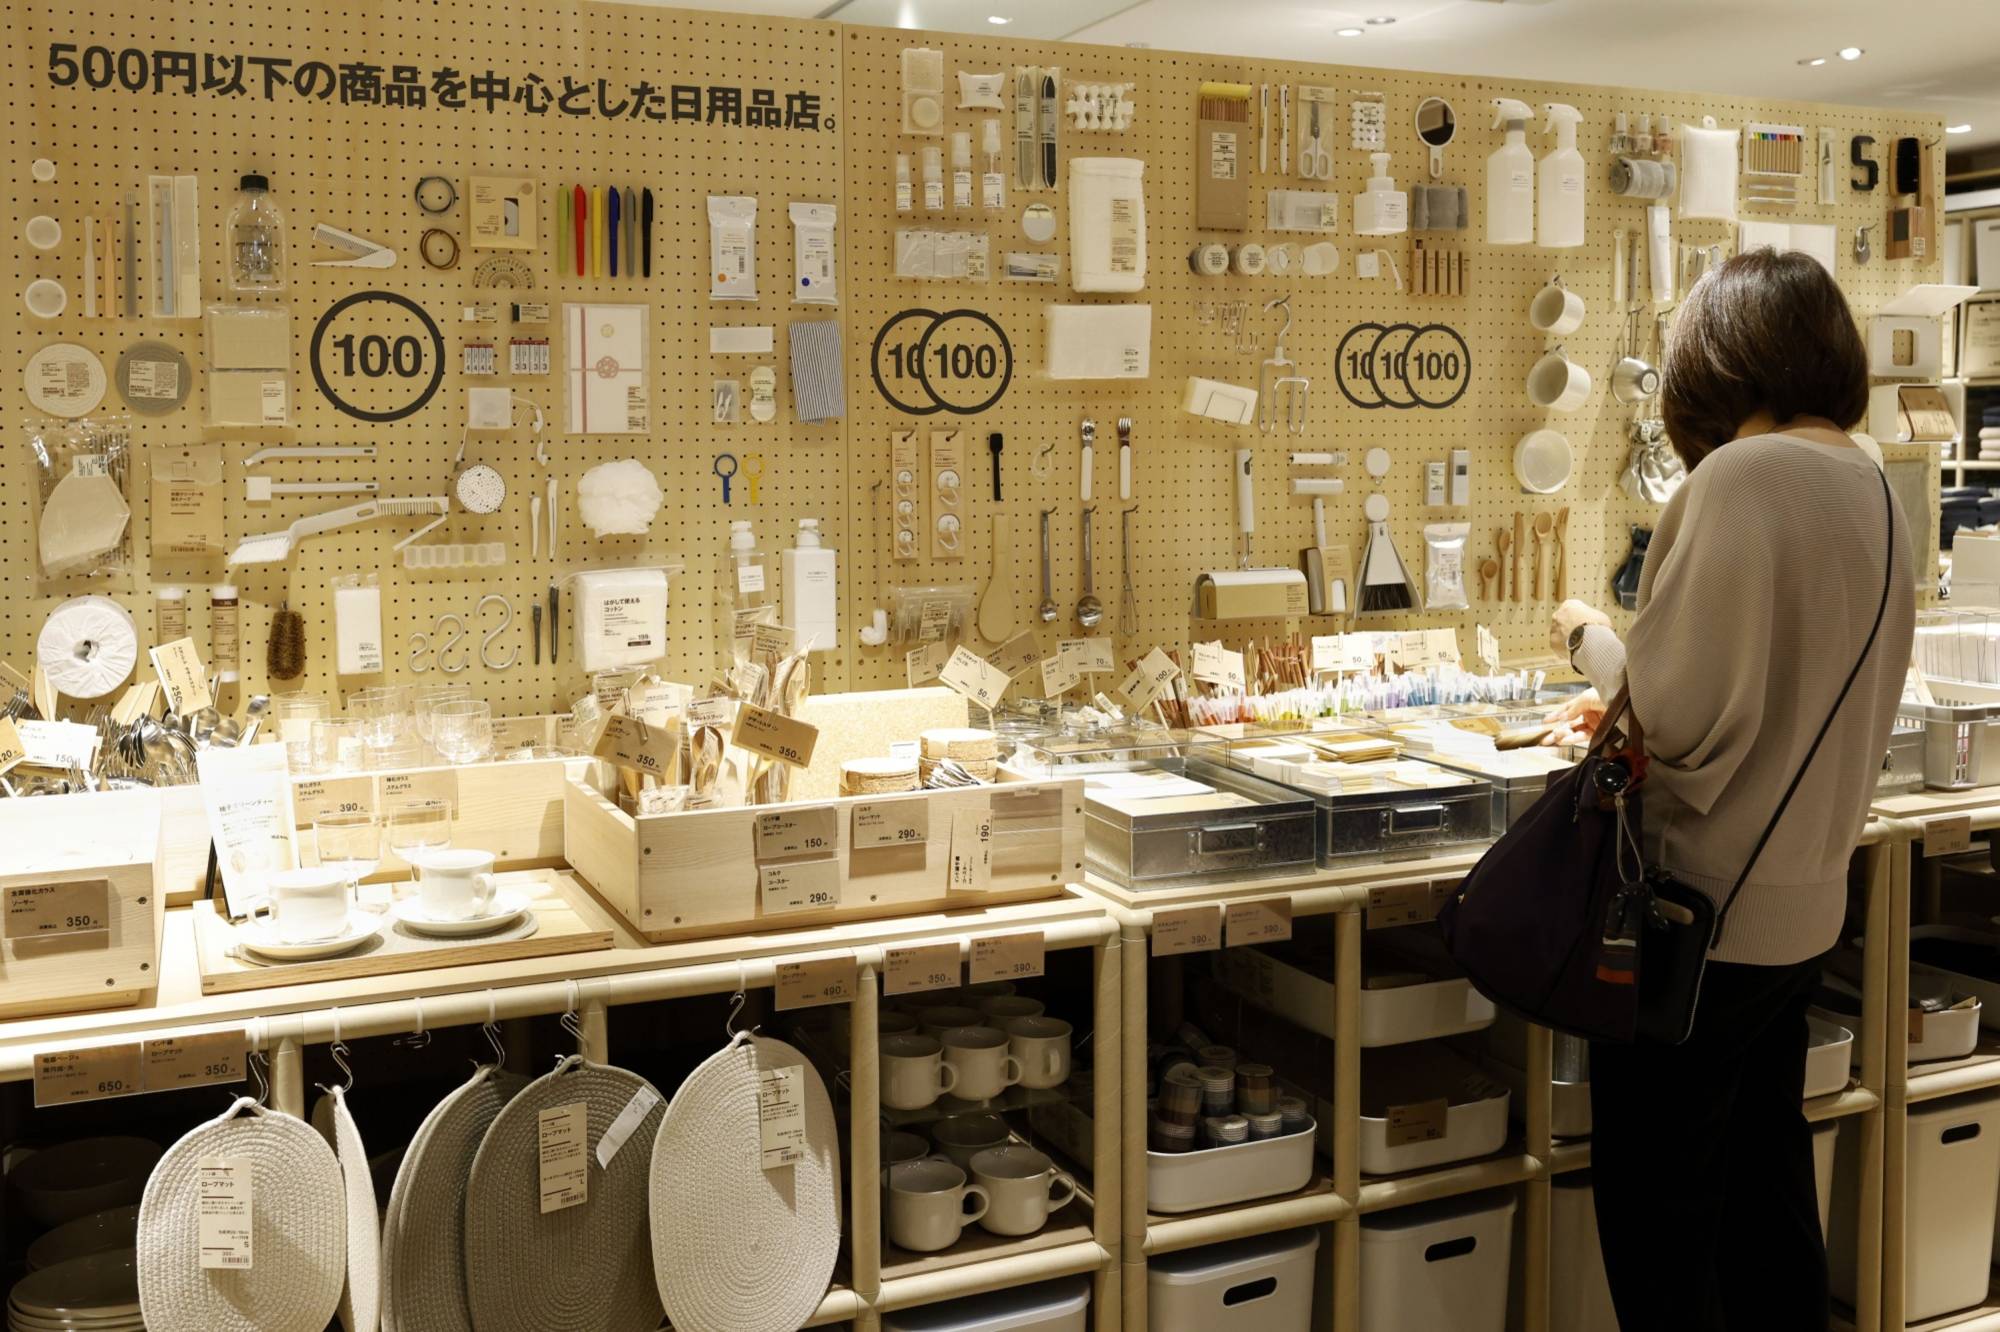 Muji opens new shops in Japan with items for less than $4 - The